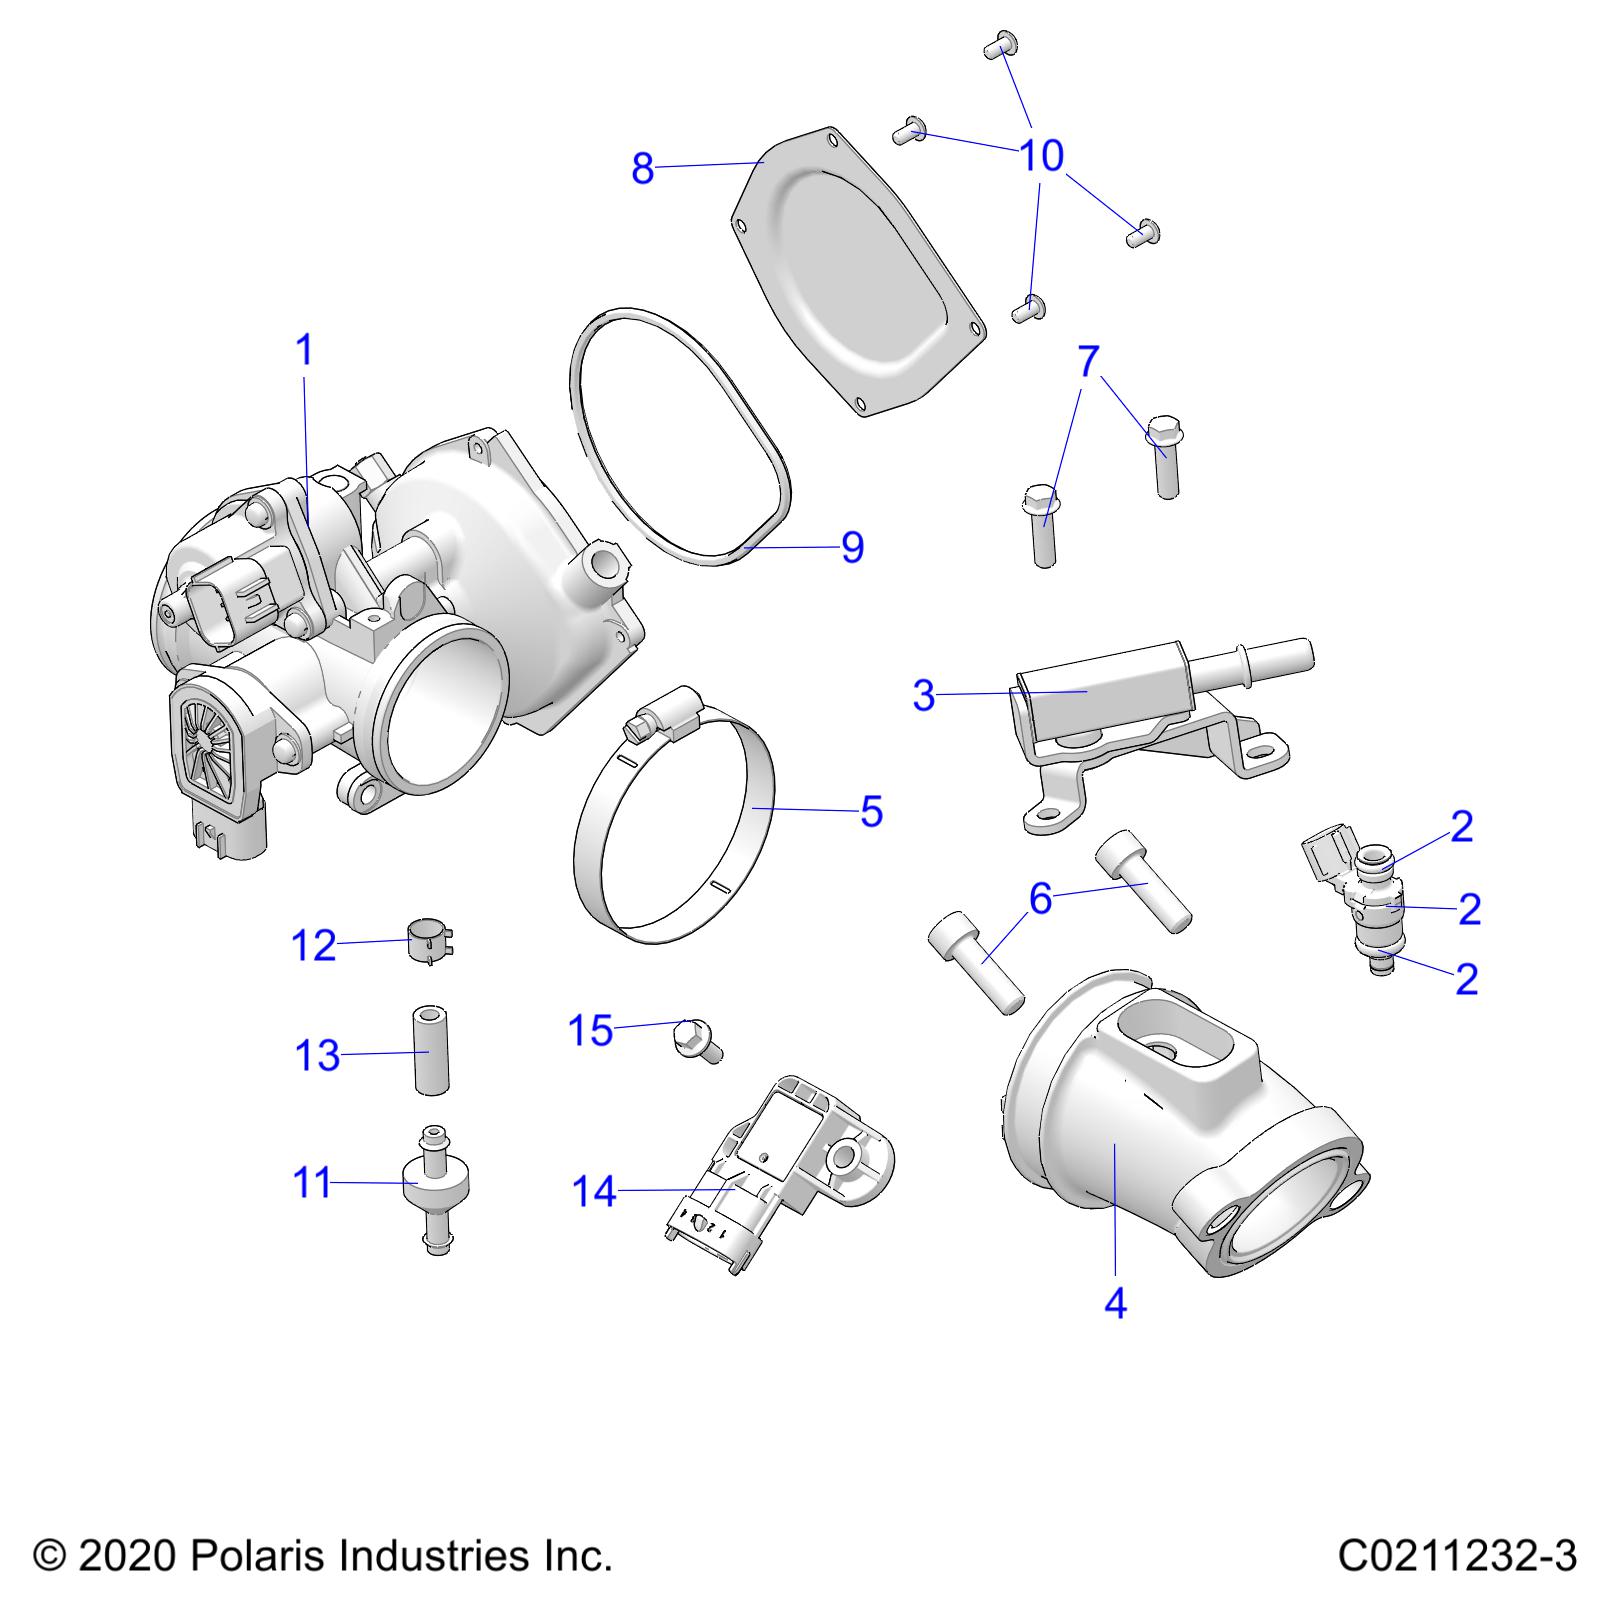 Part Number : 7052038 CHECK VALVE